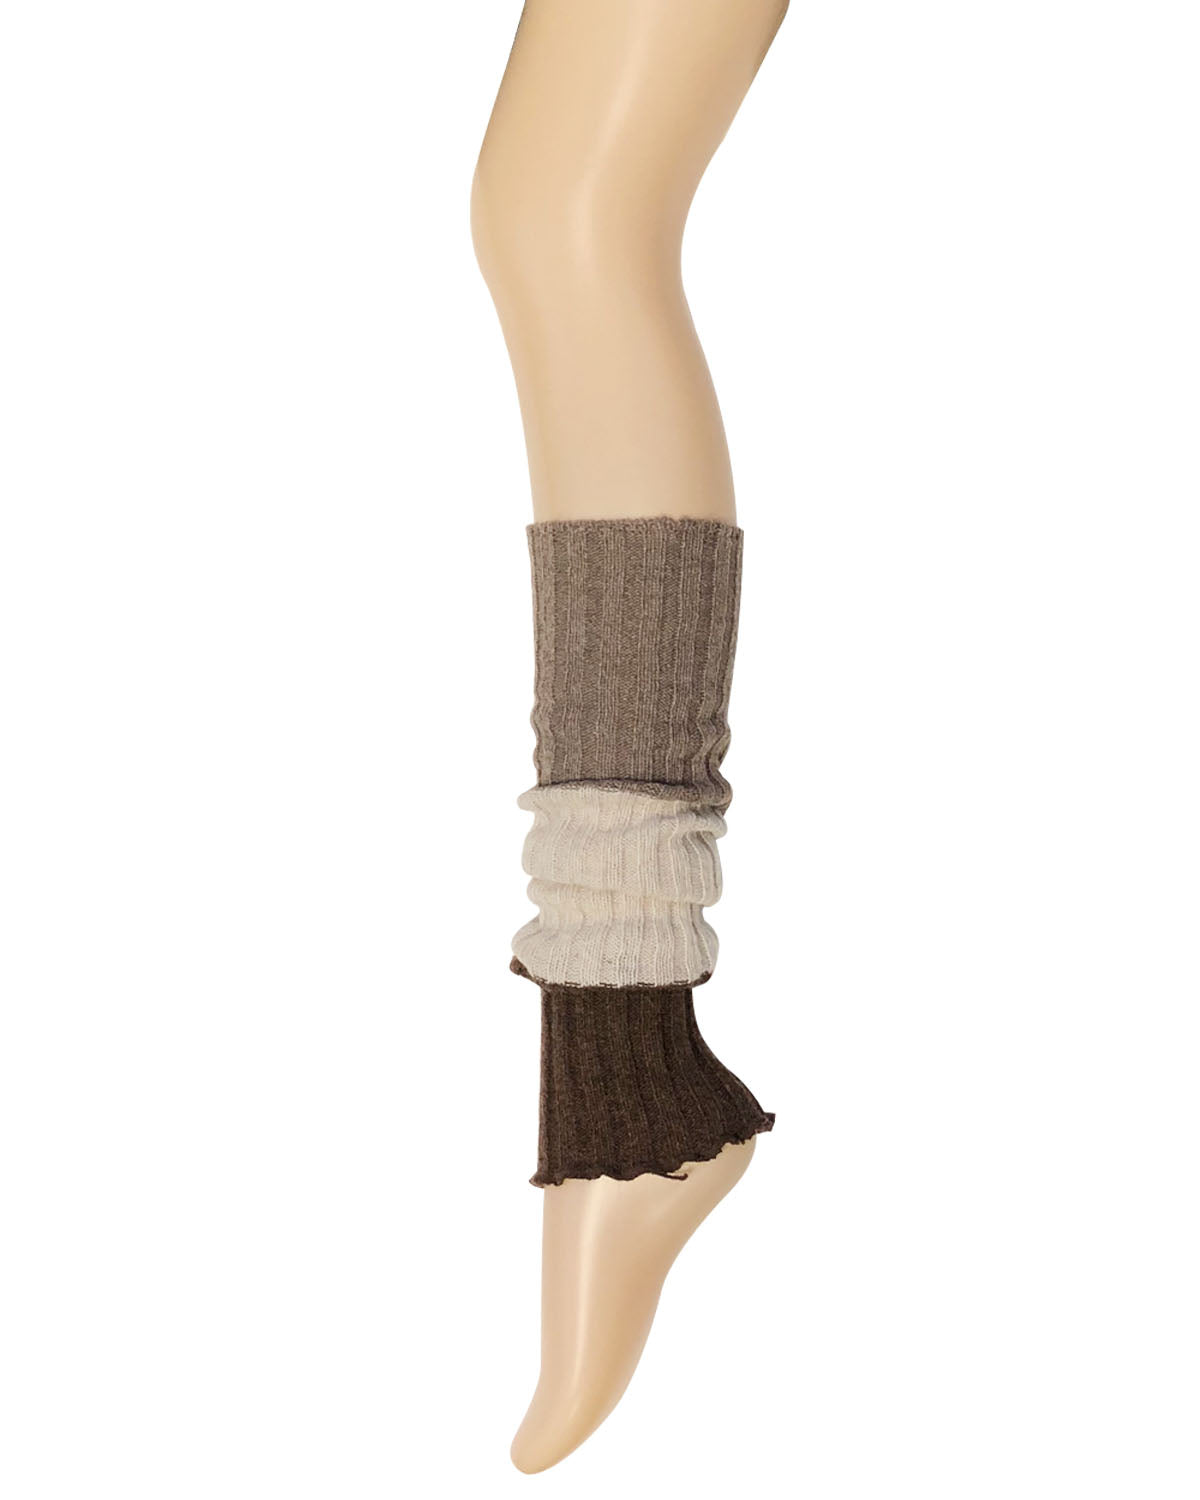 WrapablesÂ® Women's Tri-Colored Ribbed Leg Warmers